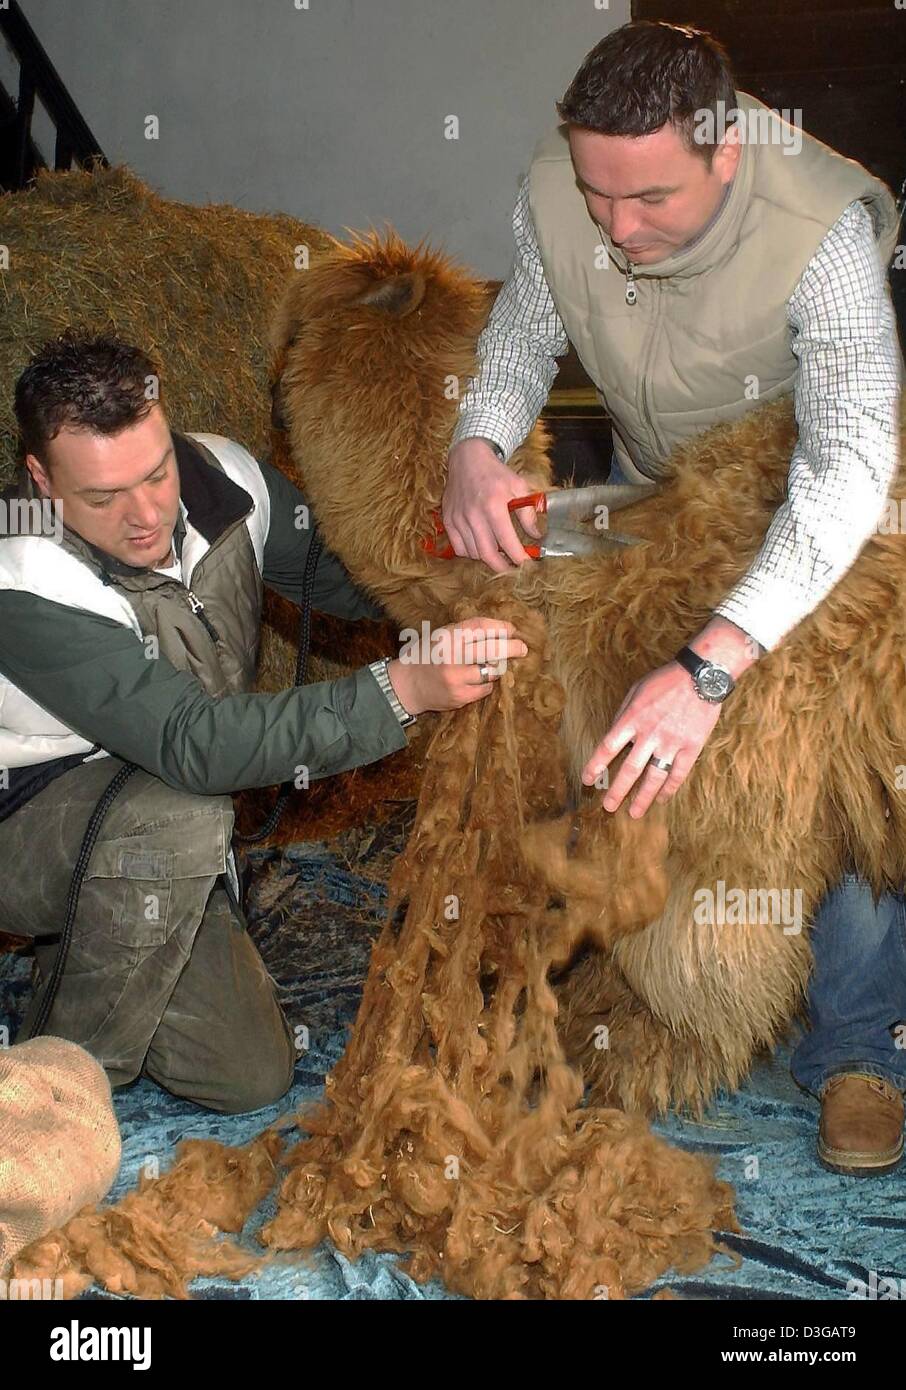 (dpa) - Andreas Borgers (R) and Jens Nachsel shear one of their alpacas on their farm in Wesel, Germany, 7 April 2004. Alpacas were once a cherished treasure of the ancient Incan civilization and played a central role in the Incan culture in South America. Nowadays, they are being successfully raised and enjoyed throughout the world as they produce one of the world's finest and mos Stock Photo